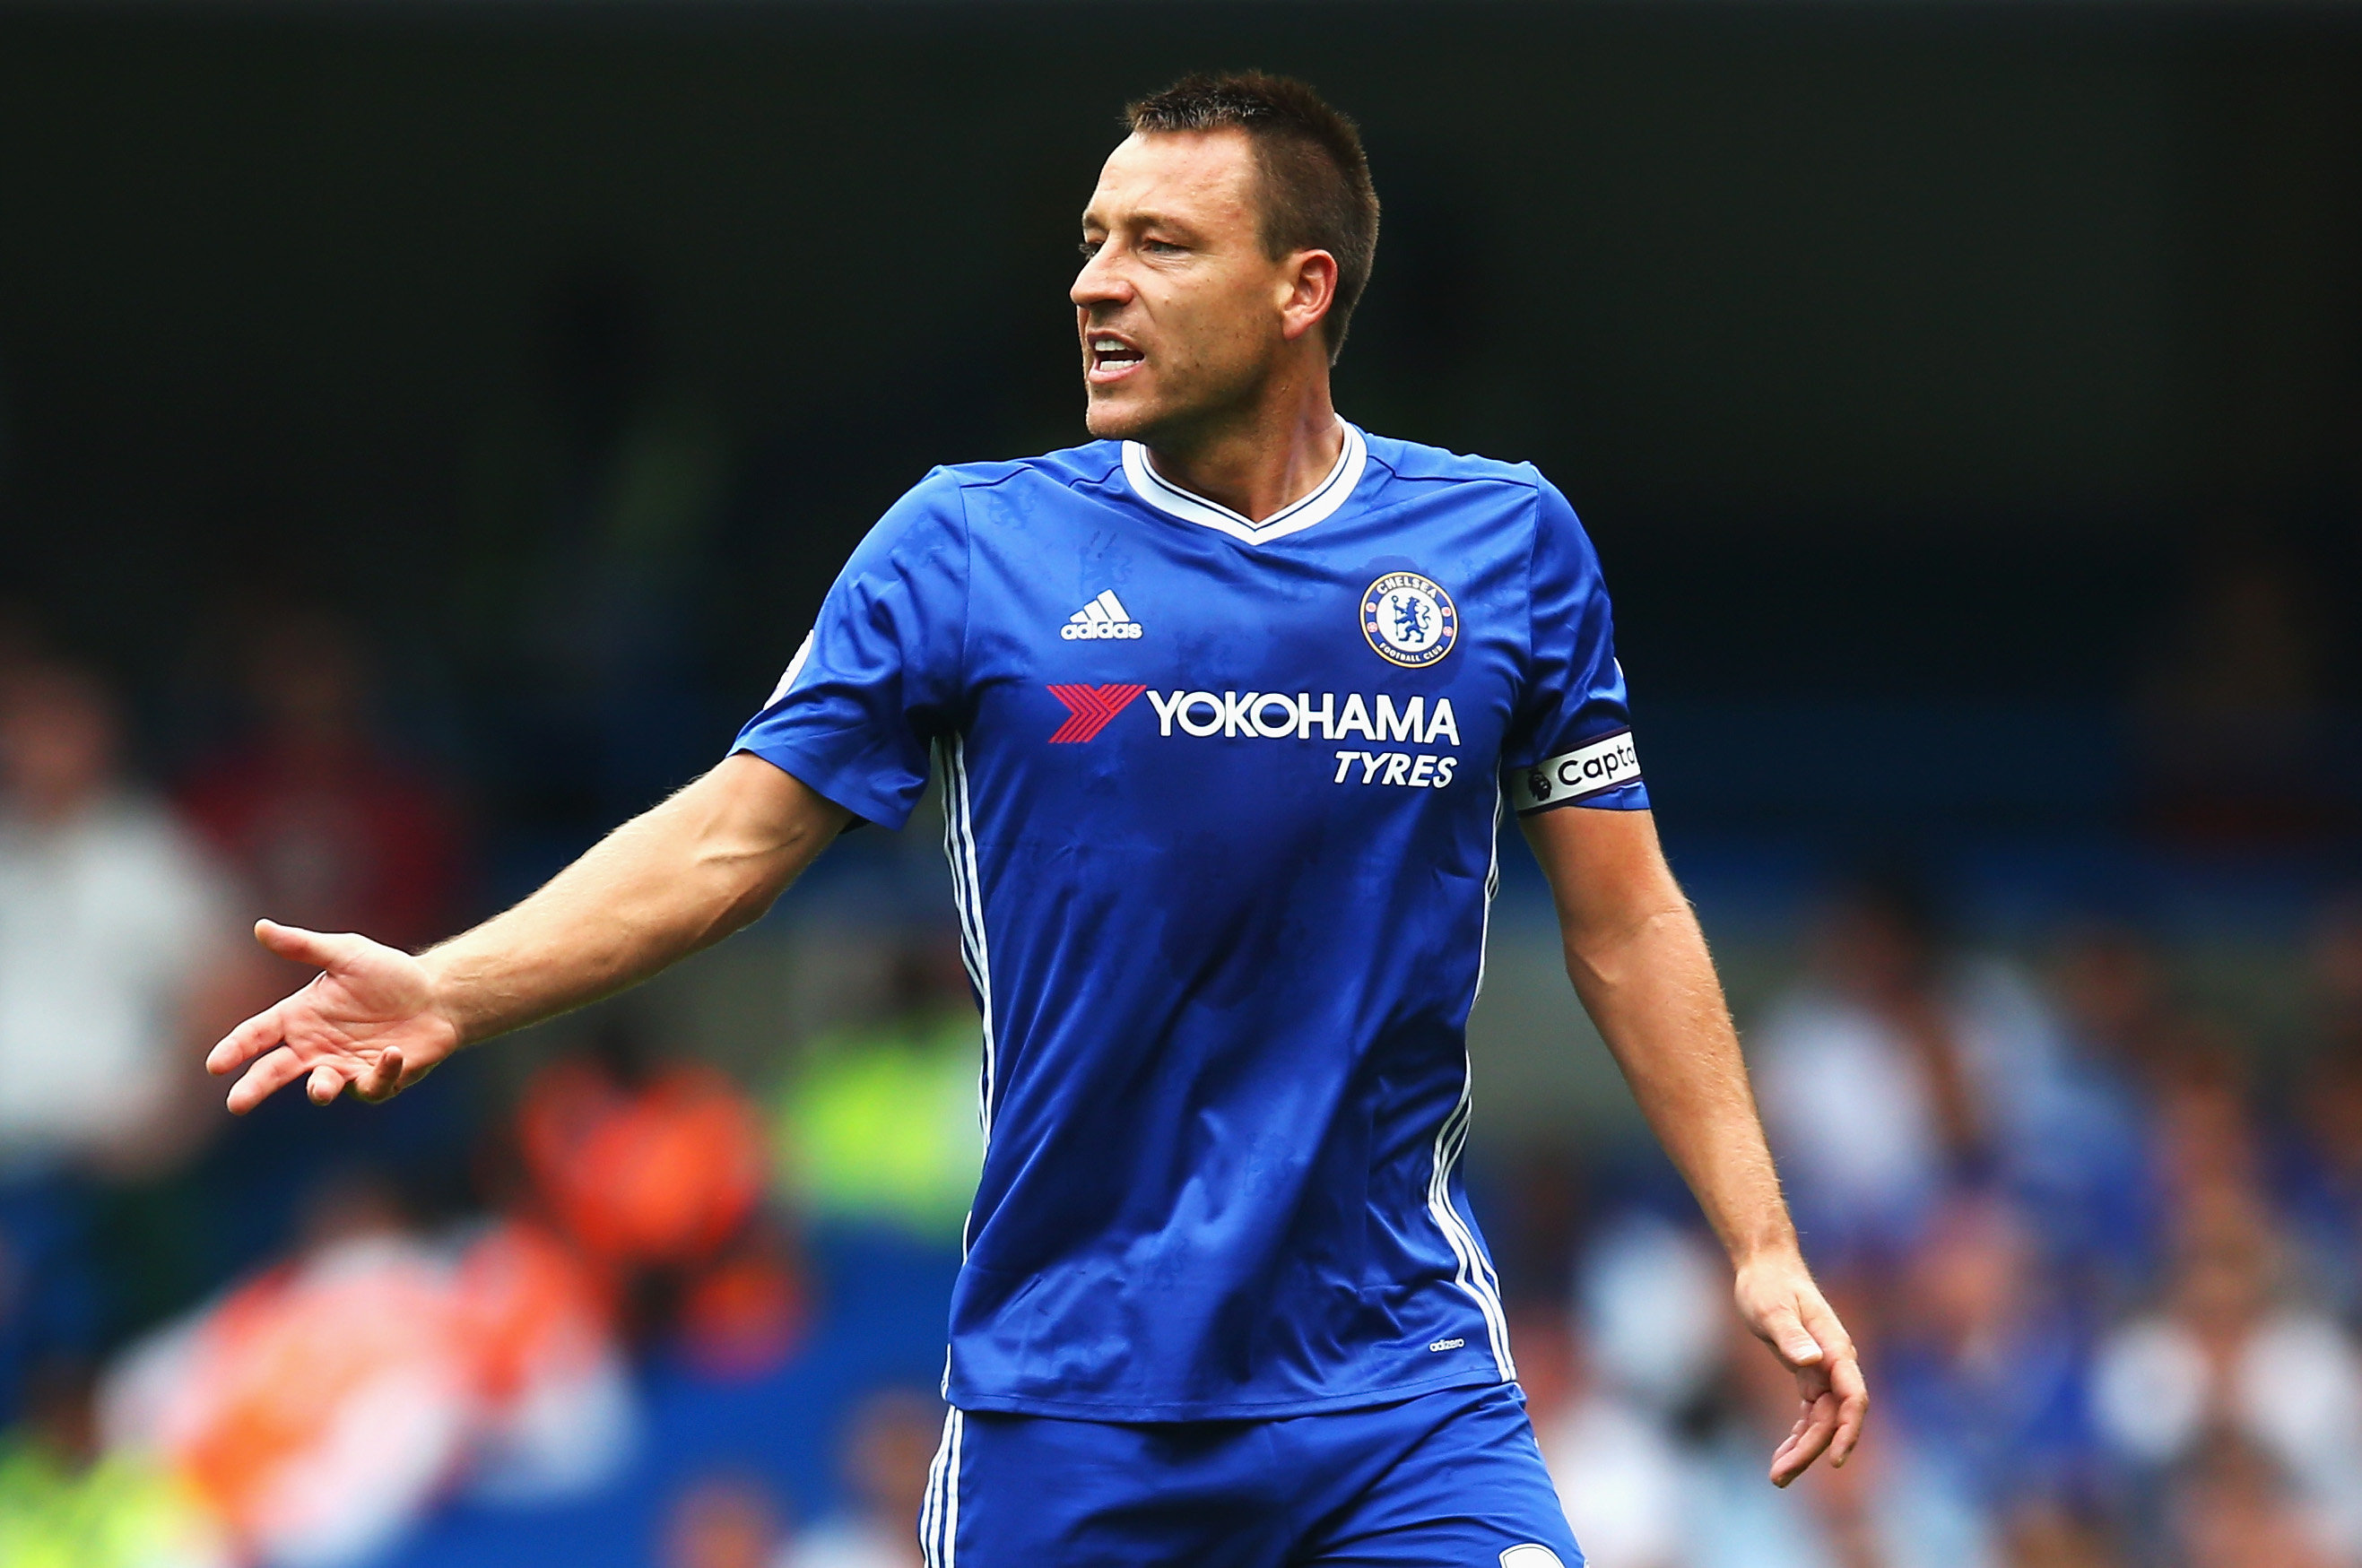 John Terry out of Hull City match with ankle injury